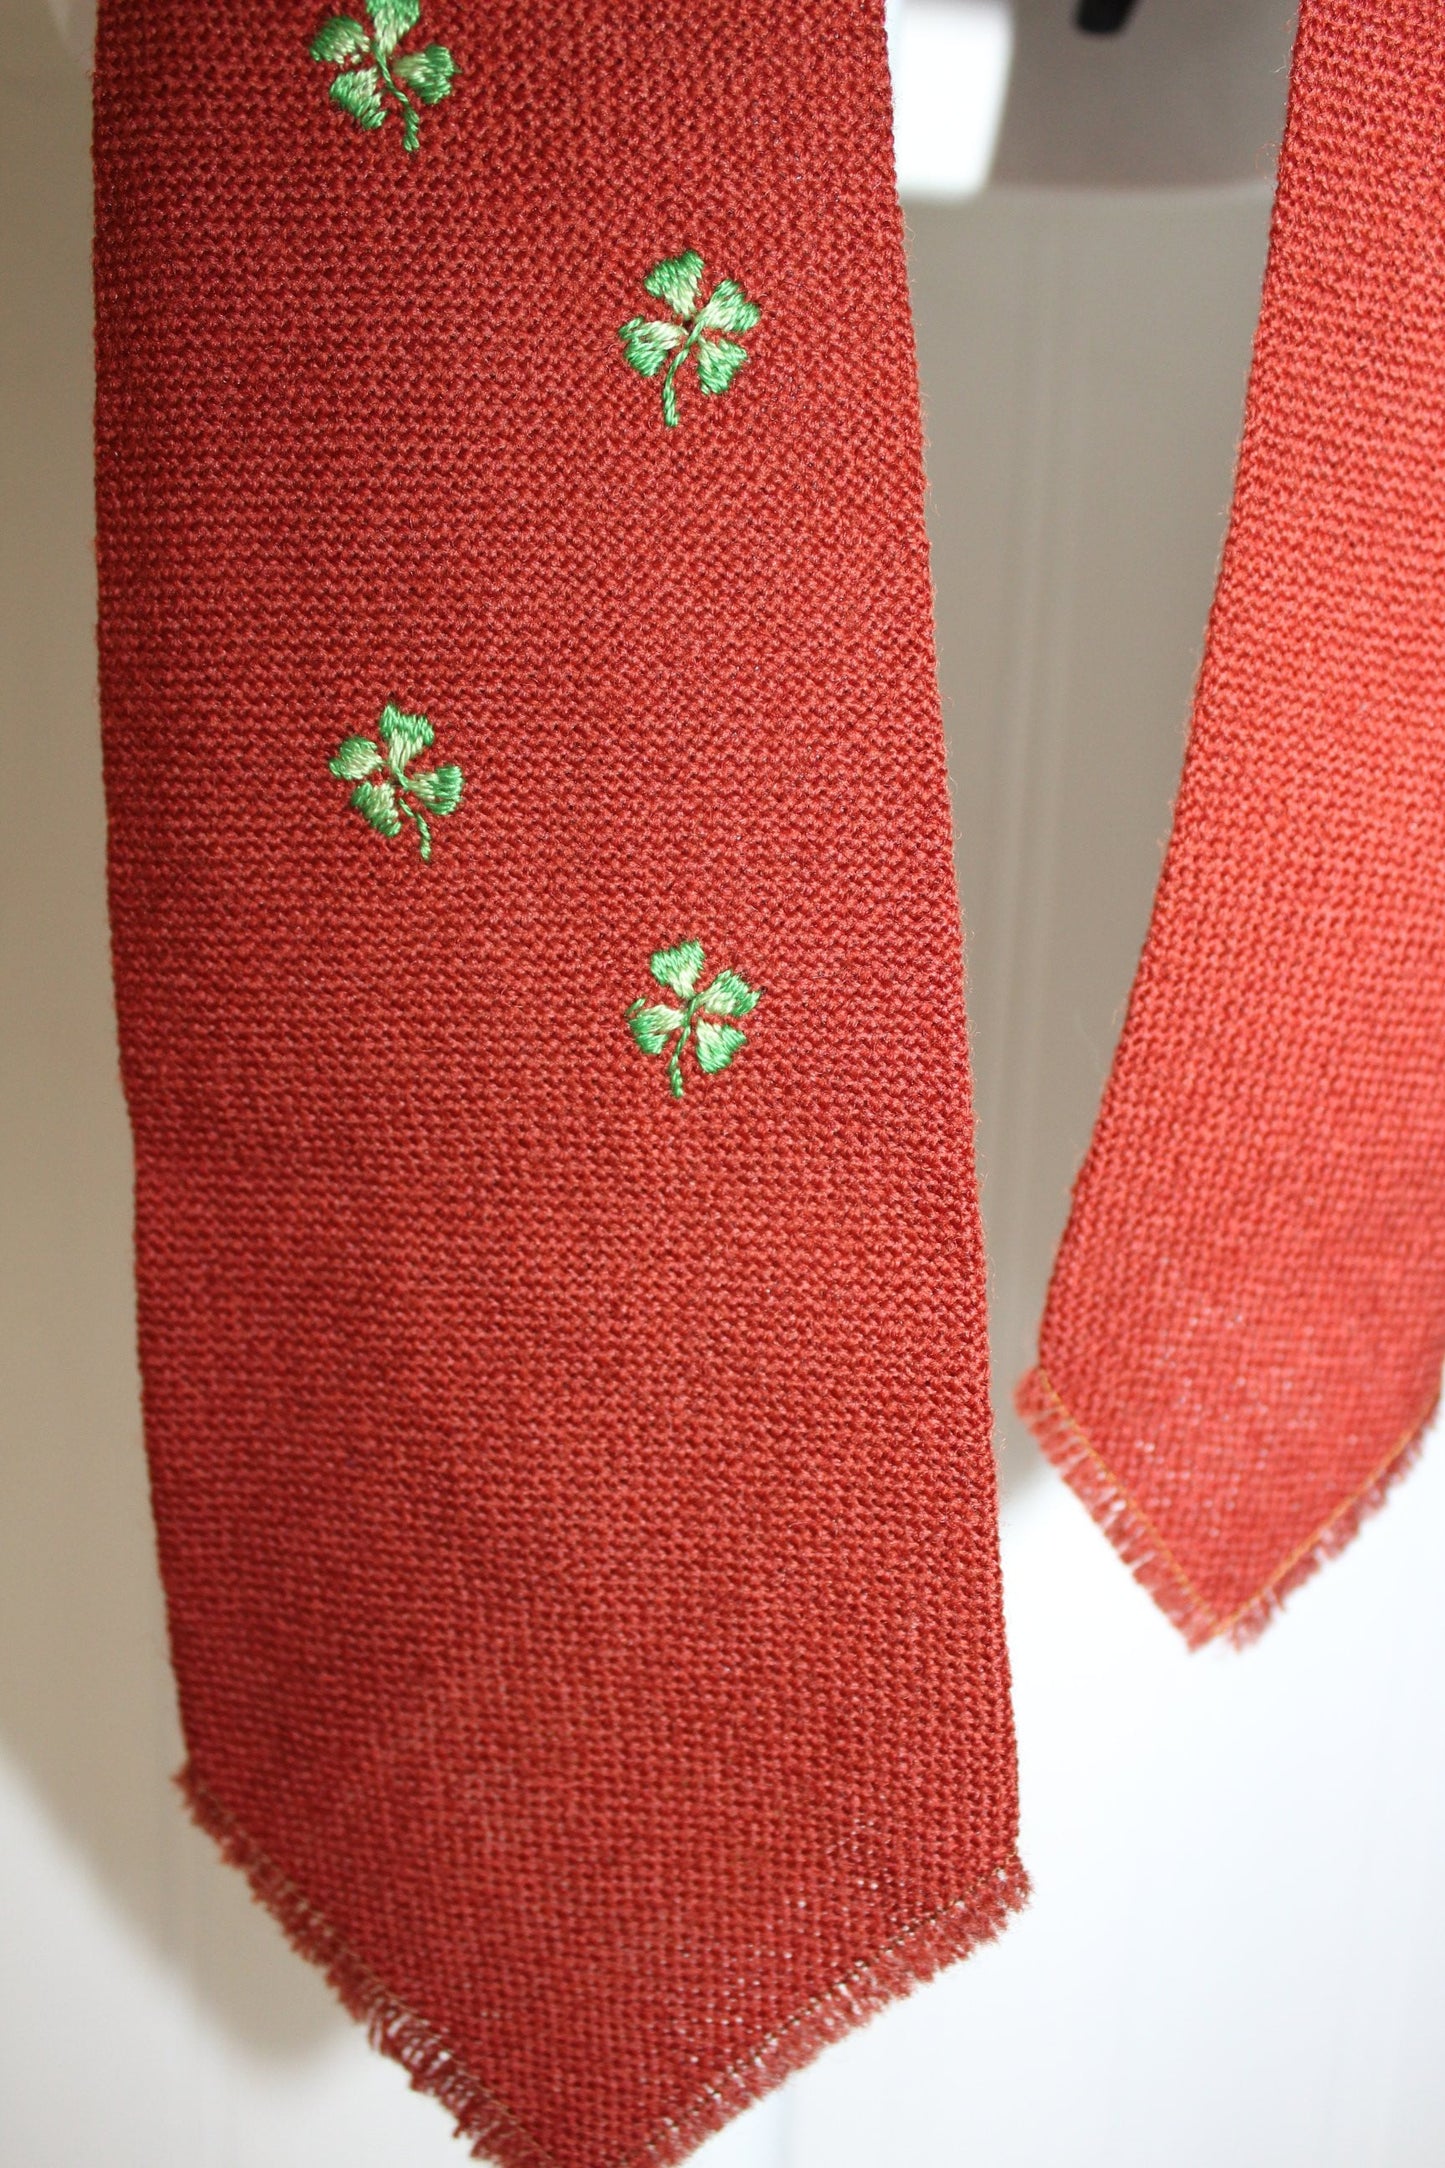 TEWA Embroidered Wool Necktie - Native American Hand Loomed - Santa Fe Mkt hand embreodery